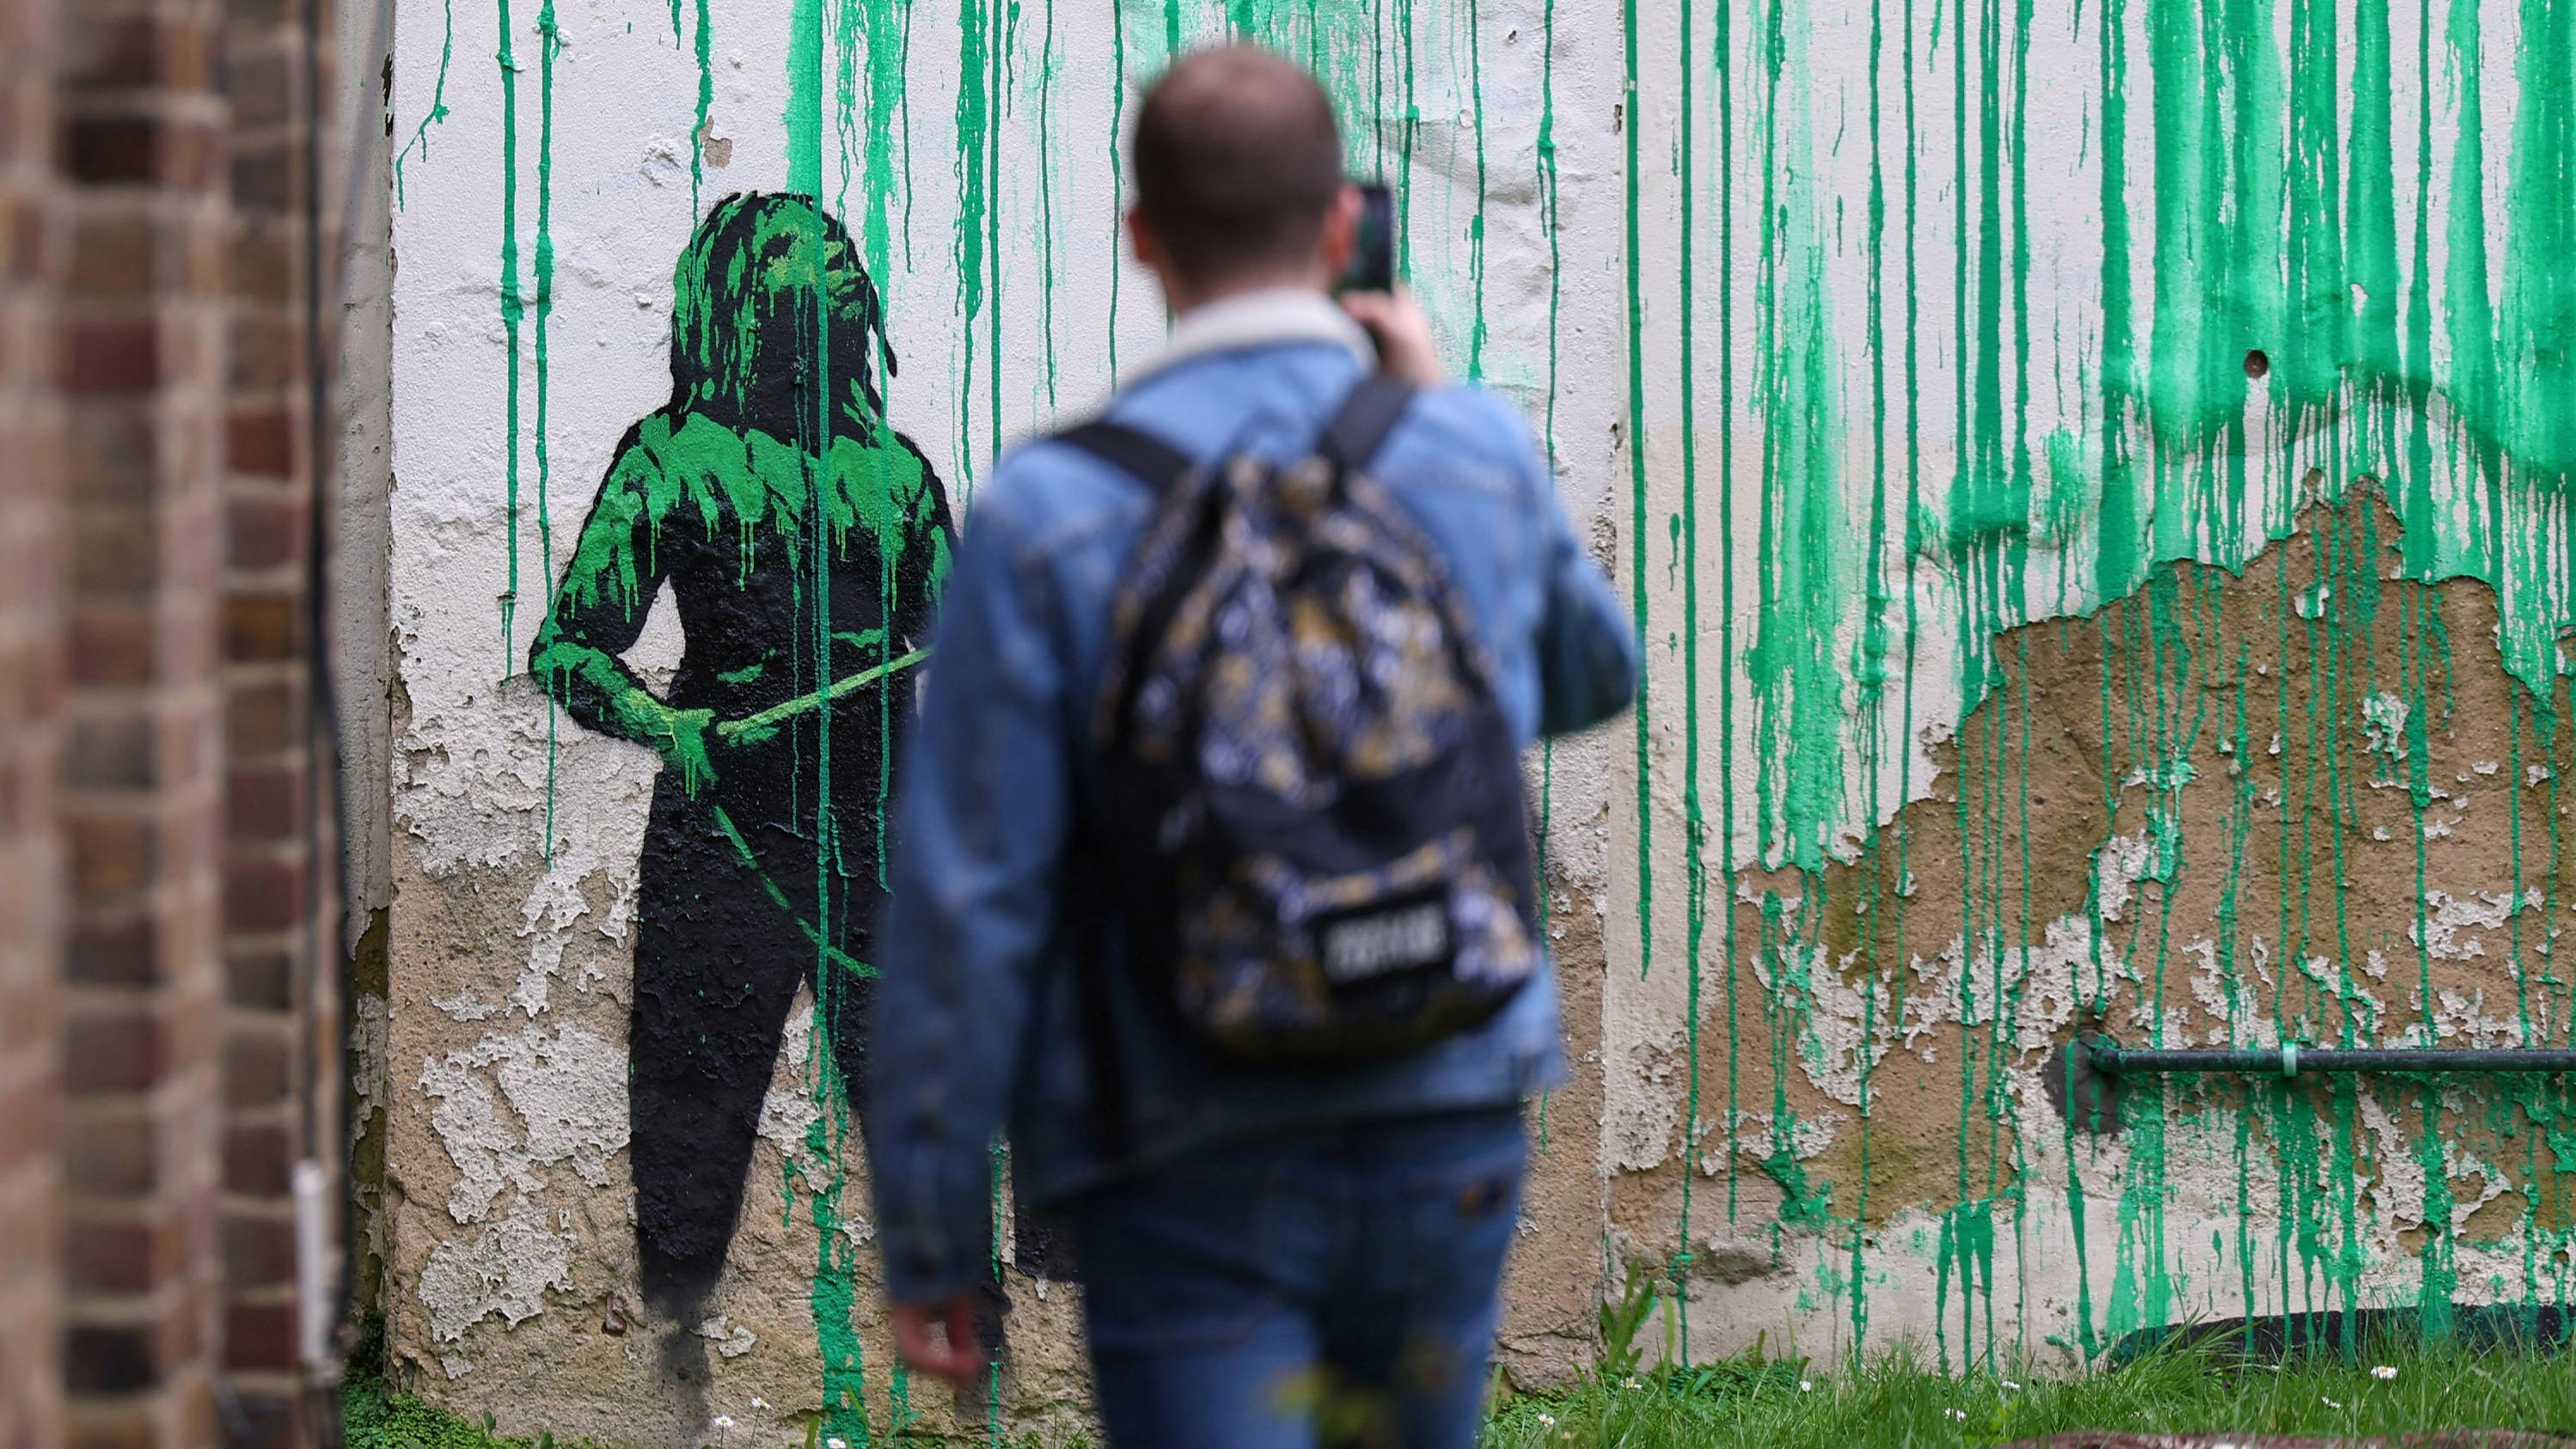 Banksy's latest fresco in London smeared with white paint